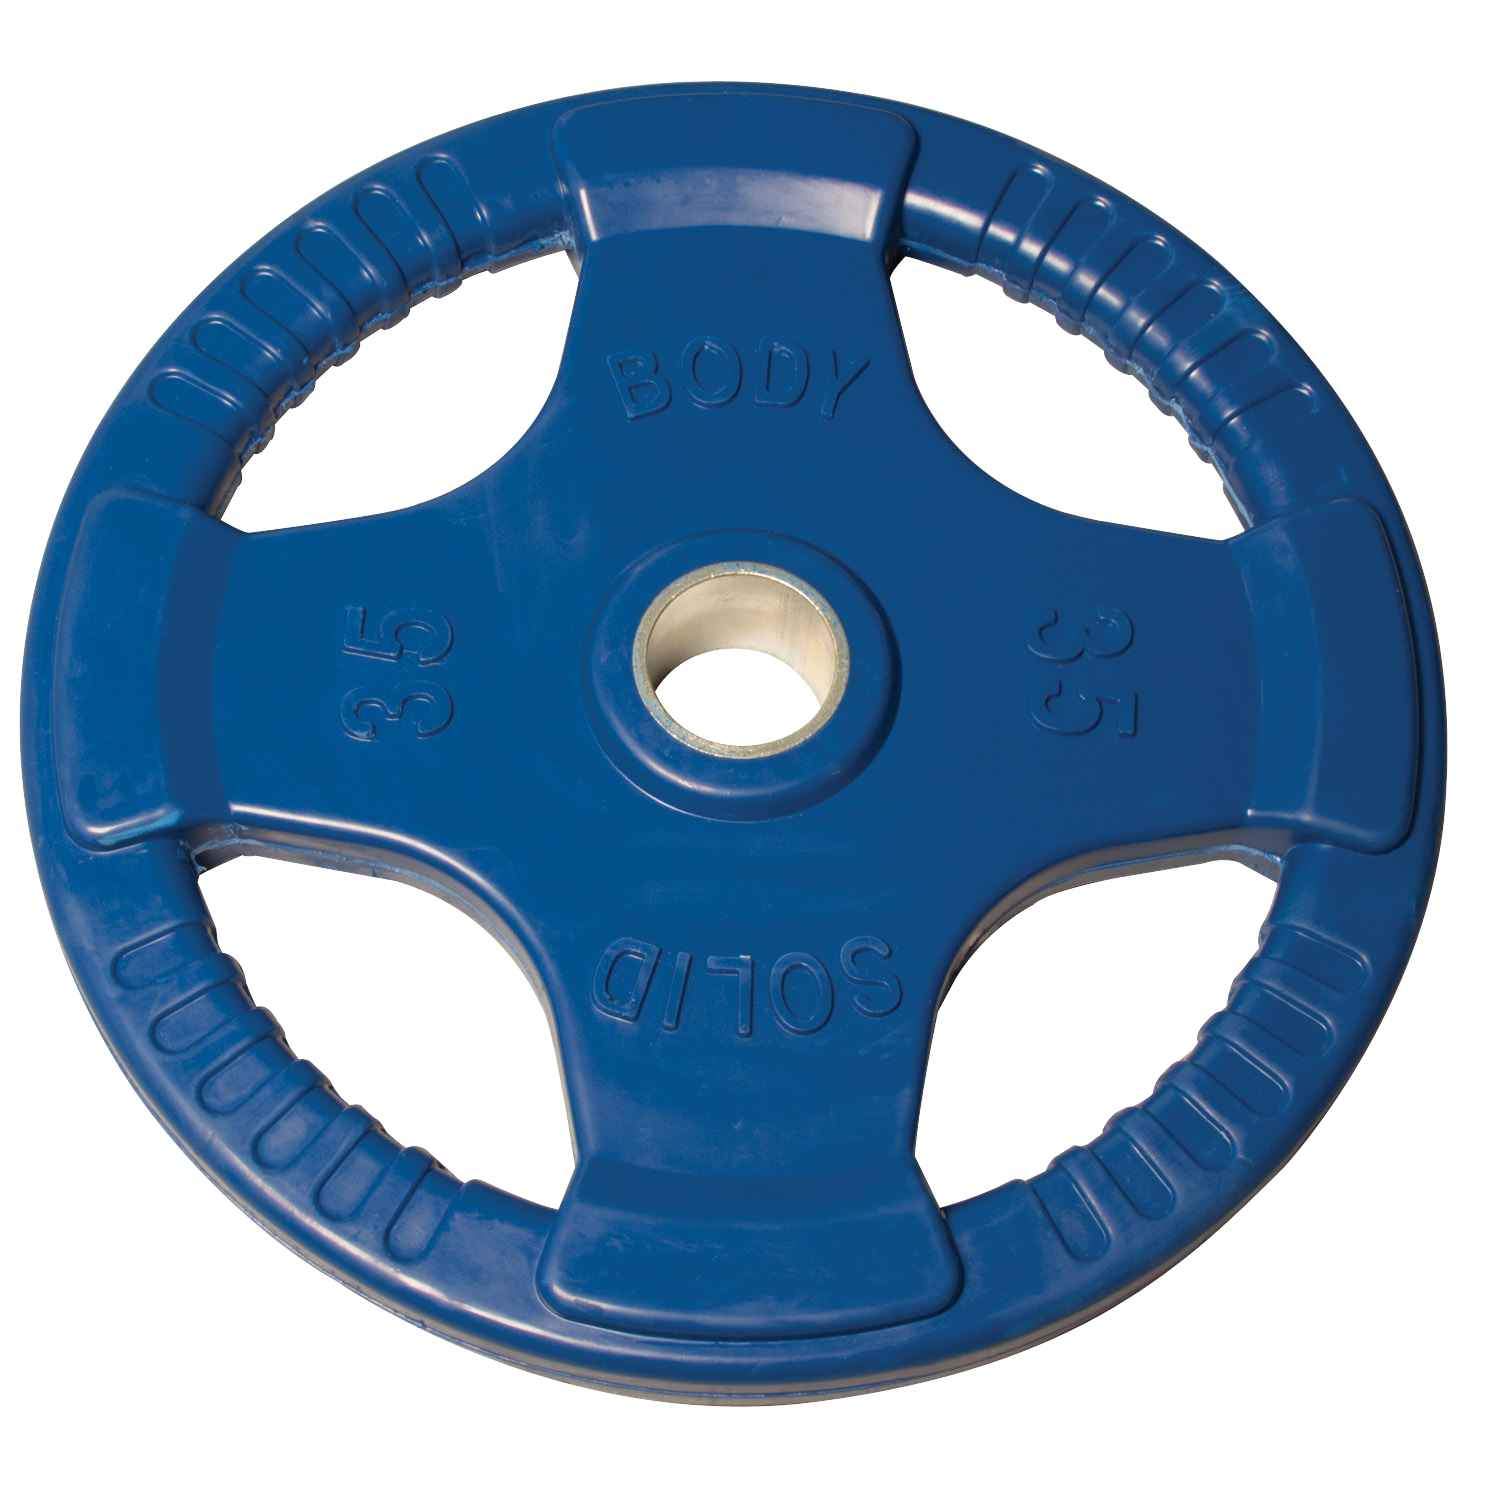 Body-Solid Colored Rubber Grip Olympic Plate Set